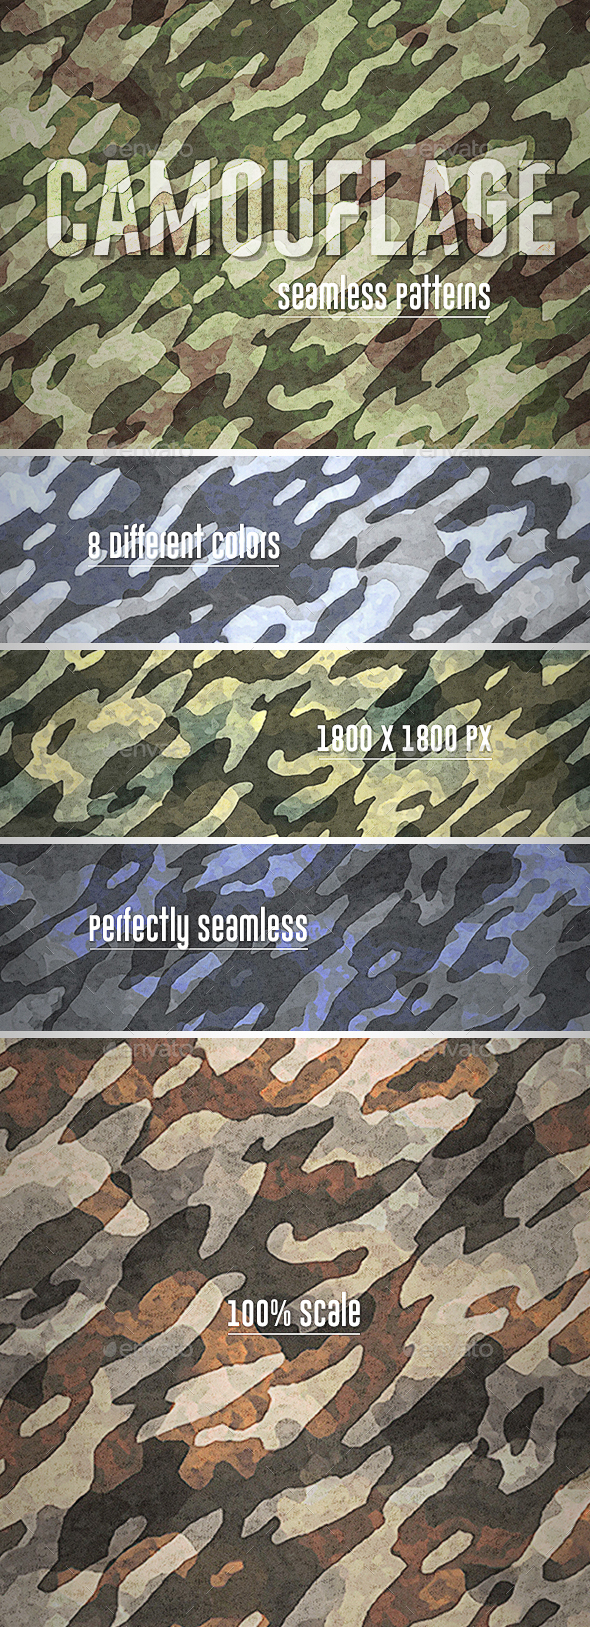 types of camouflage